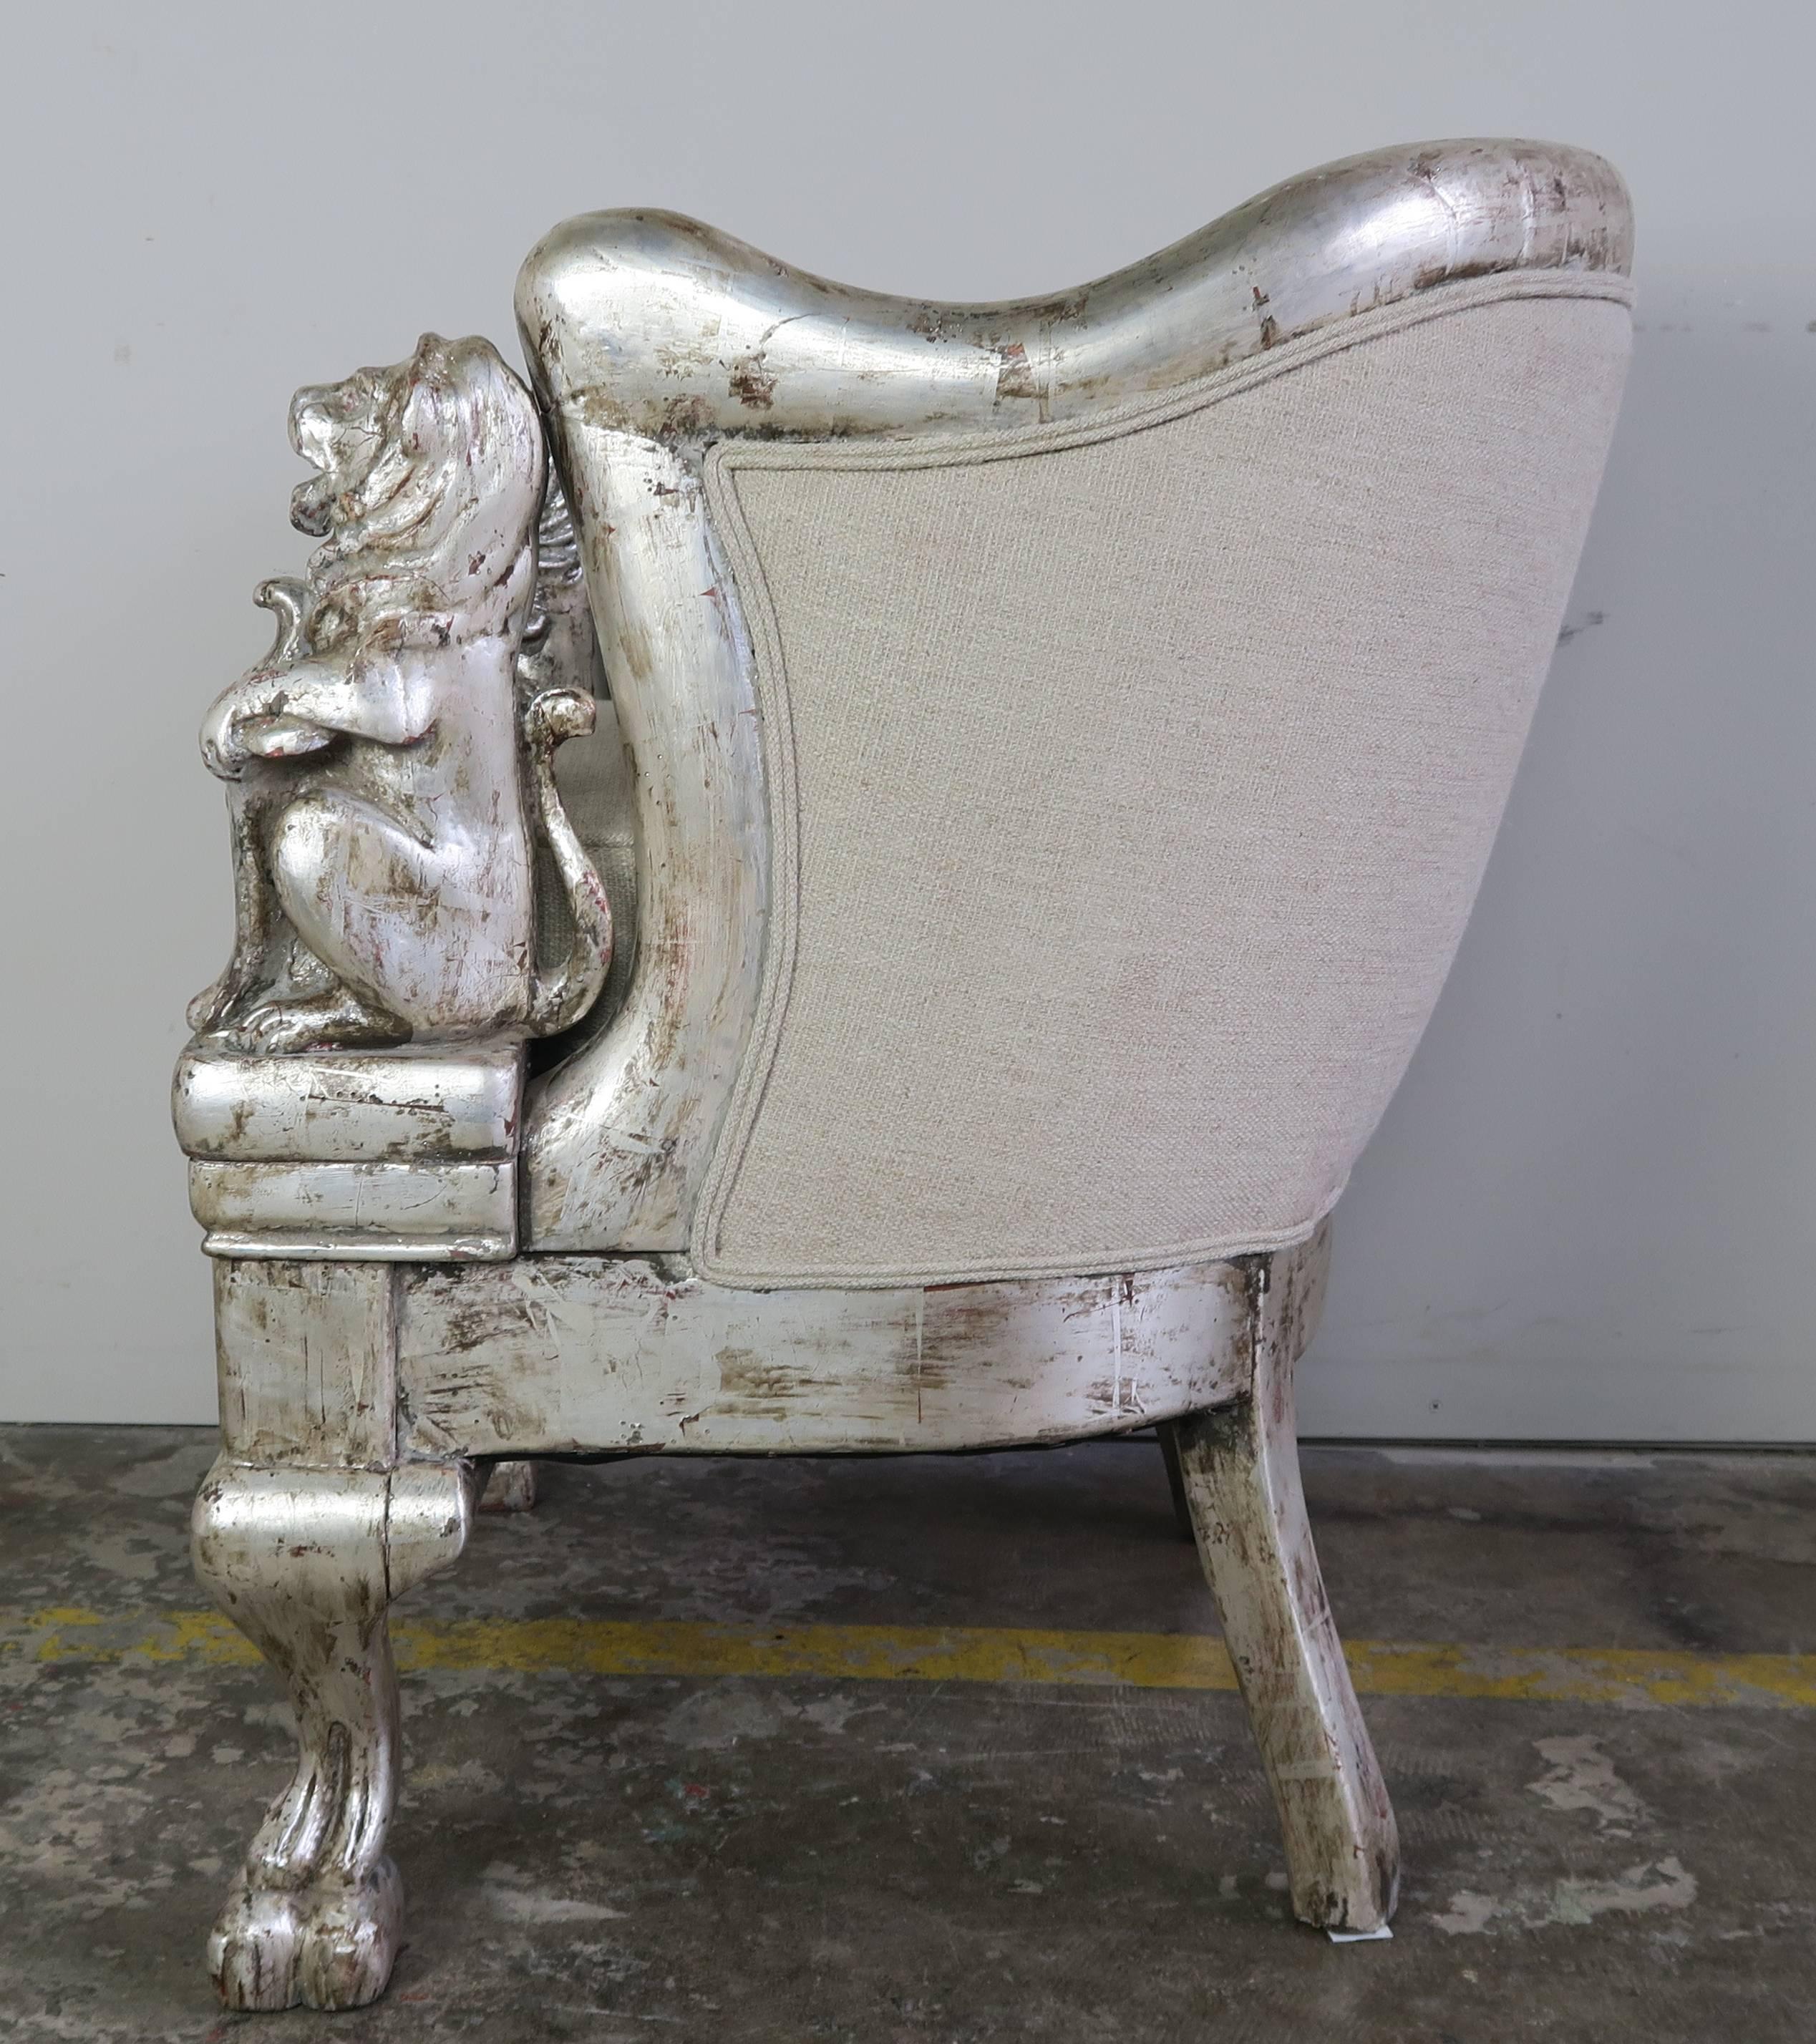 Pair of 19th century silvered armchairs with carved wood lions holding shields flanking both sides of each chairs. Beautiful carved lion feet in front. Newly upholstered in linen with loose seat cushion and double self cording.